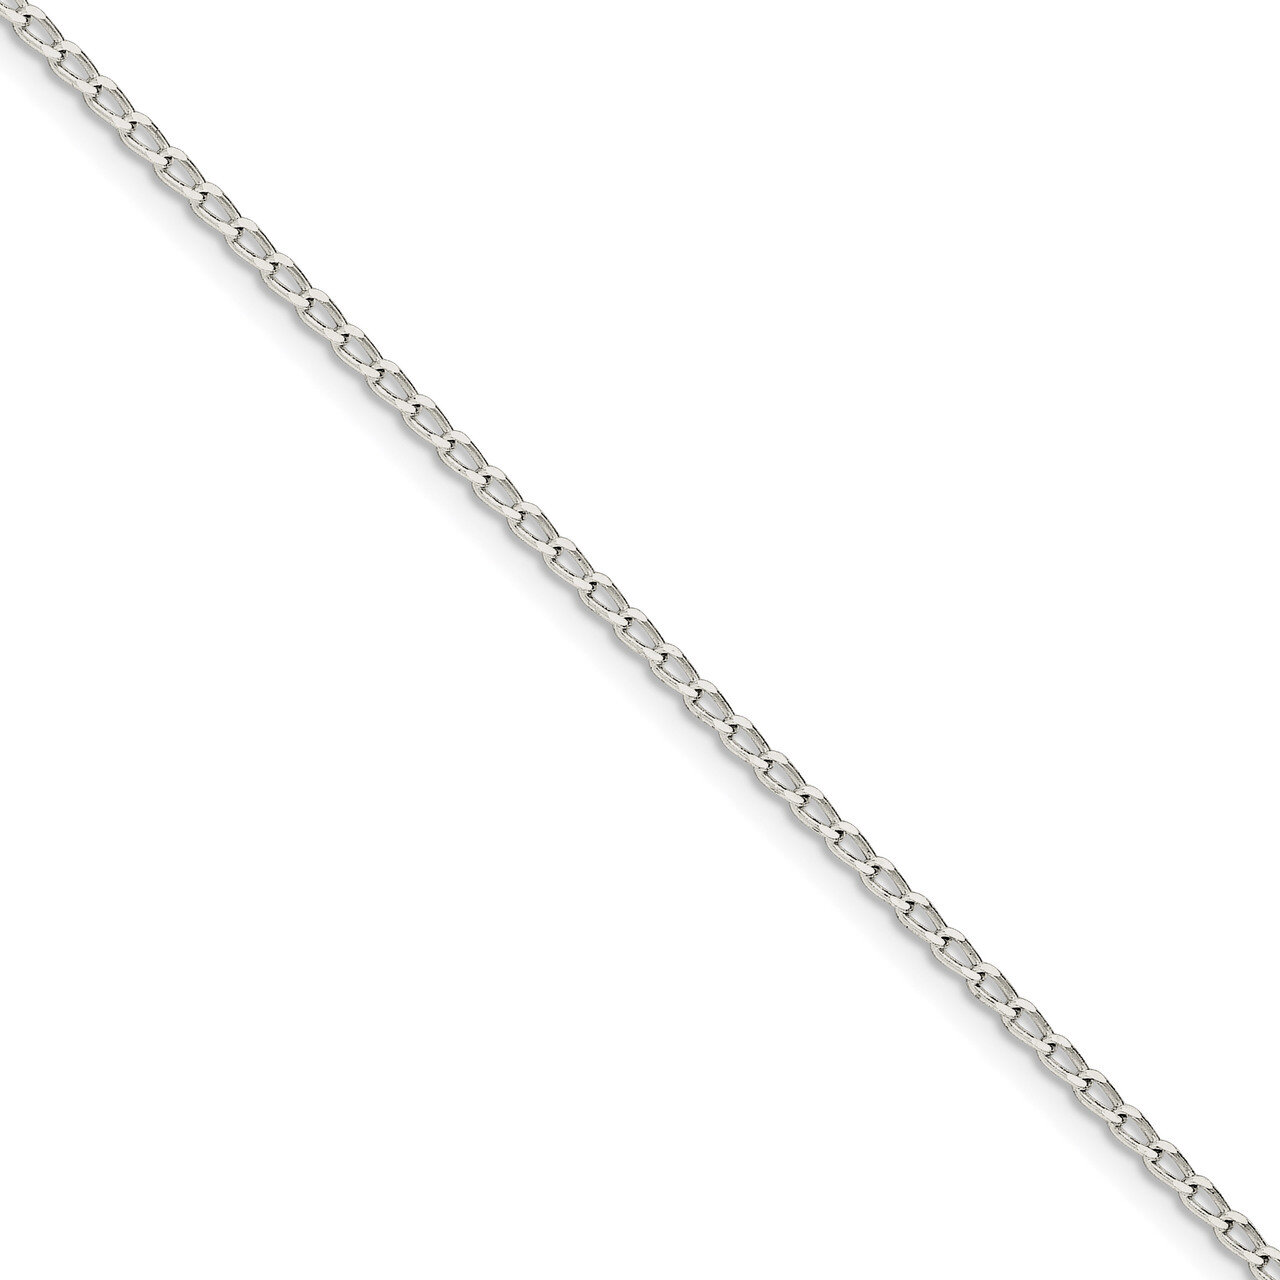 7 Inch 2.0mm Open Link Chain Sterling Silver QLL060-7